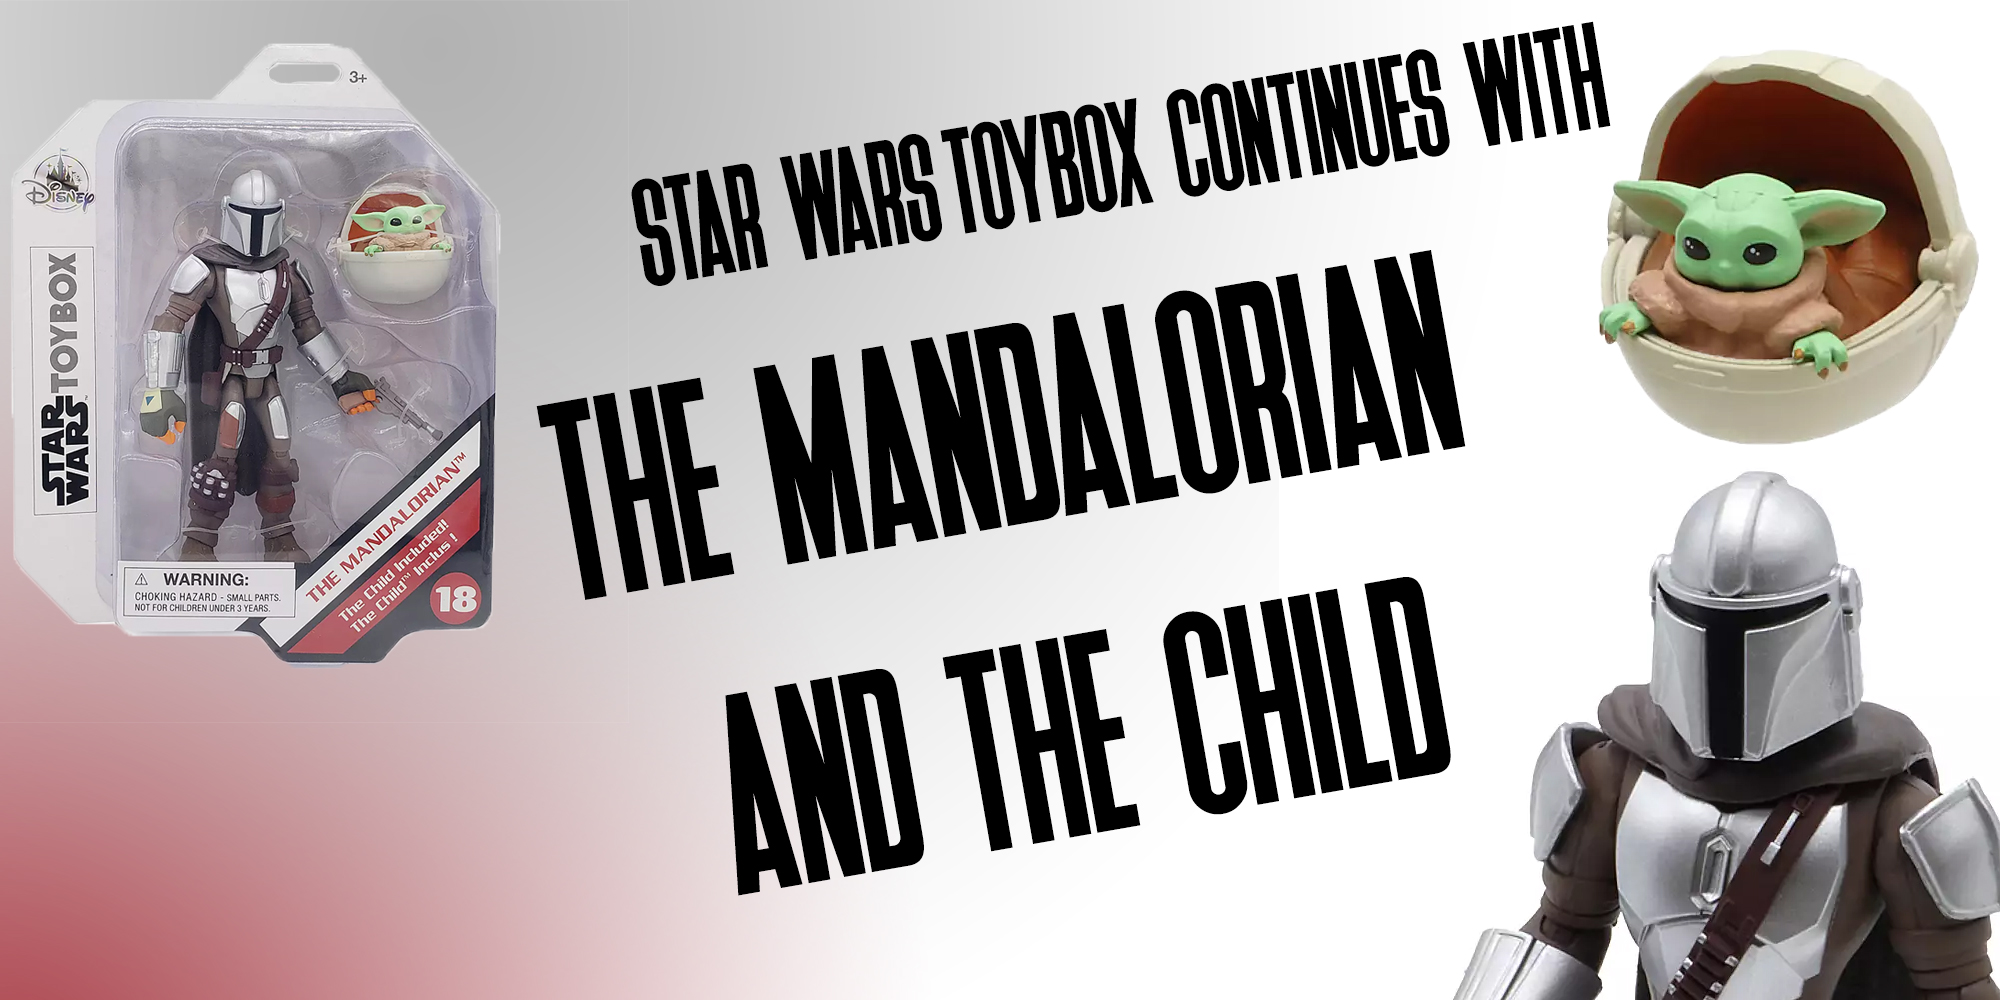 Disney's 5" ToyBox Action Figure Line Continues With The Mandalorian And Child